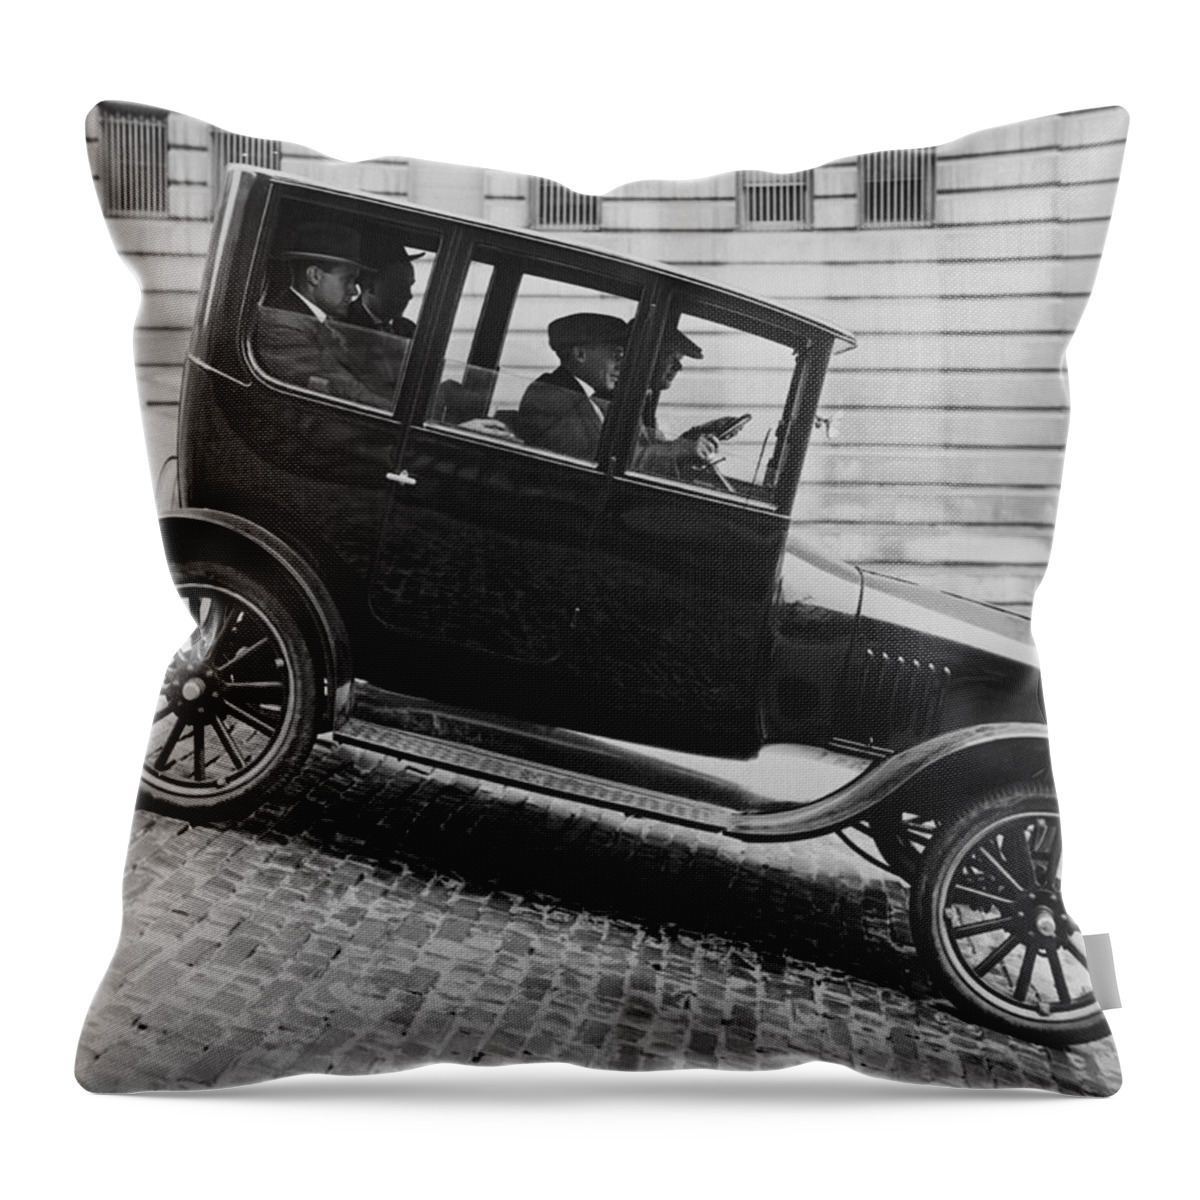 1035-163 Throw Pillow featuring the photograph 1921 Ford Model T Tudor by Underwood Archives